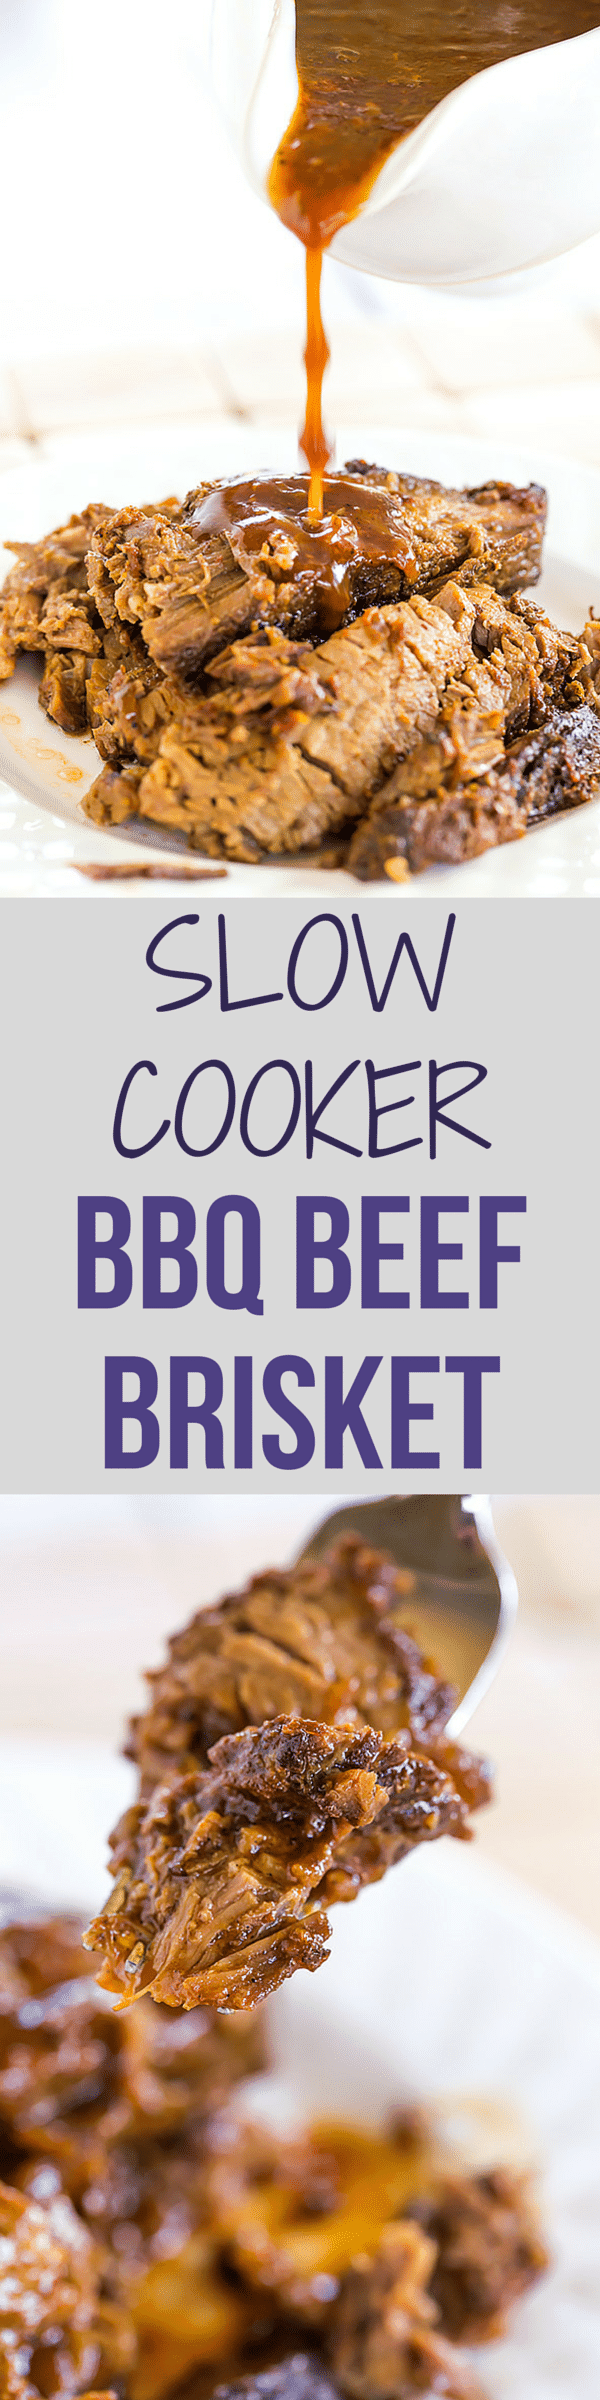 This slow cooker beef brisket is incredibly easy, cooks itself, and full of flavor thanks to the simple homemade barbecue sauce!